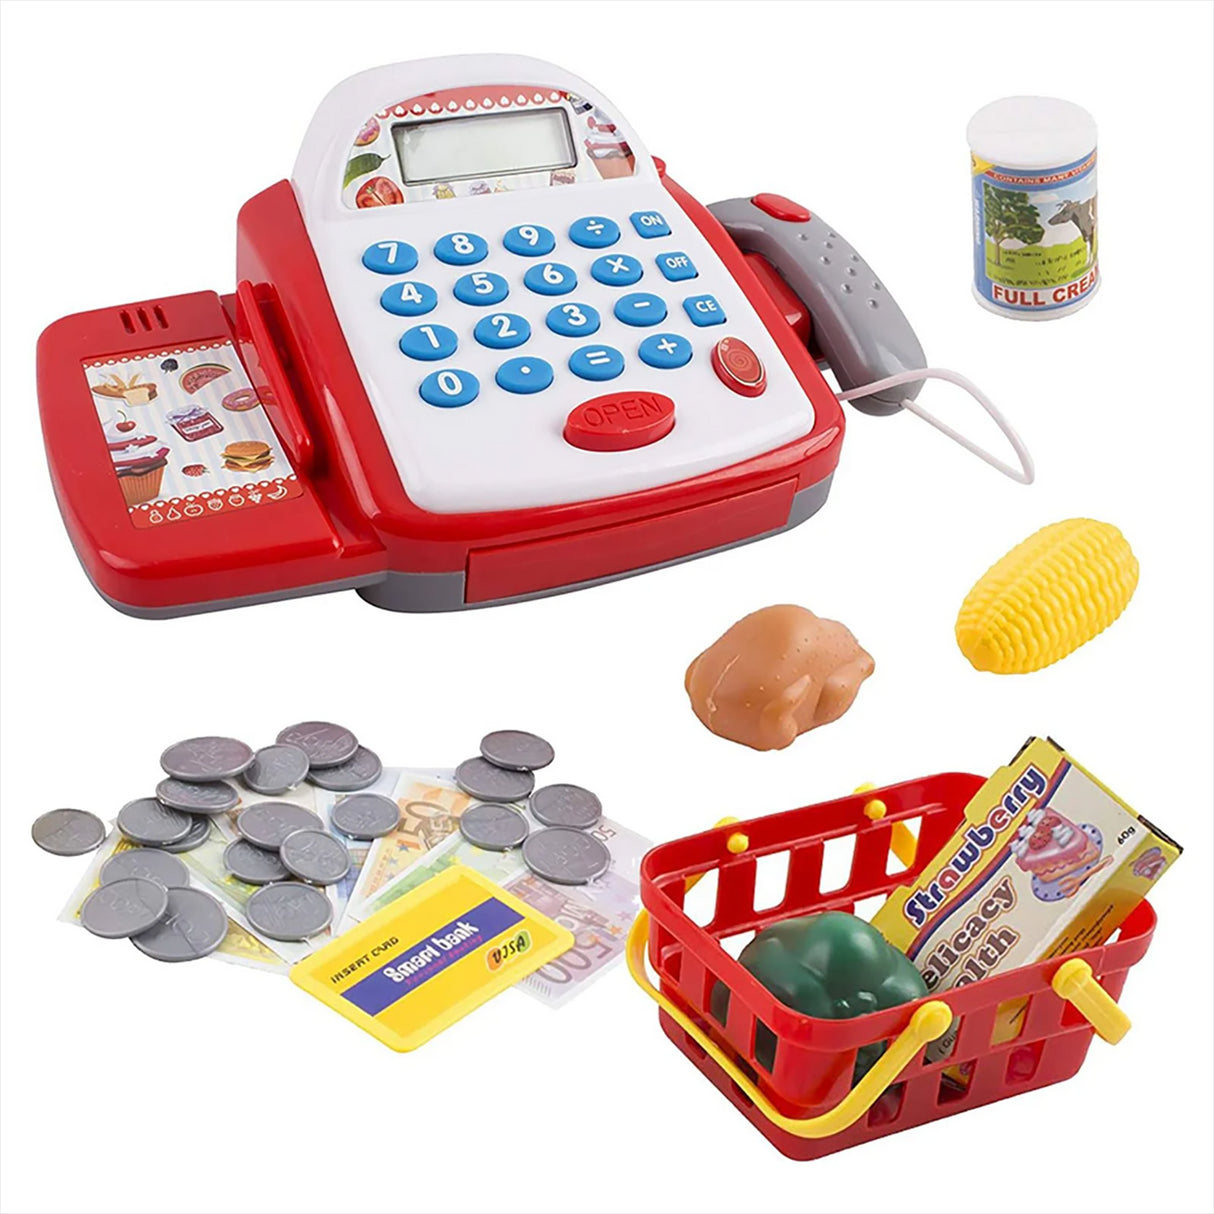 White & Red Cash Register Toy by The Magic Toy Shop - UKBuyZone